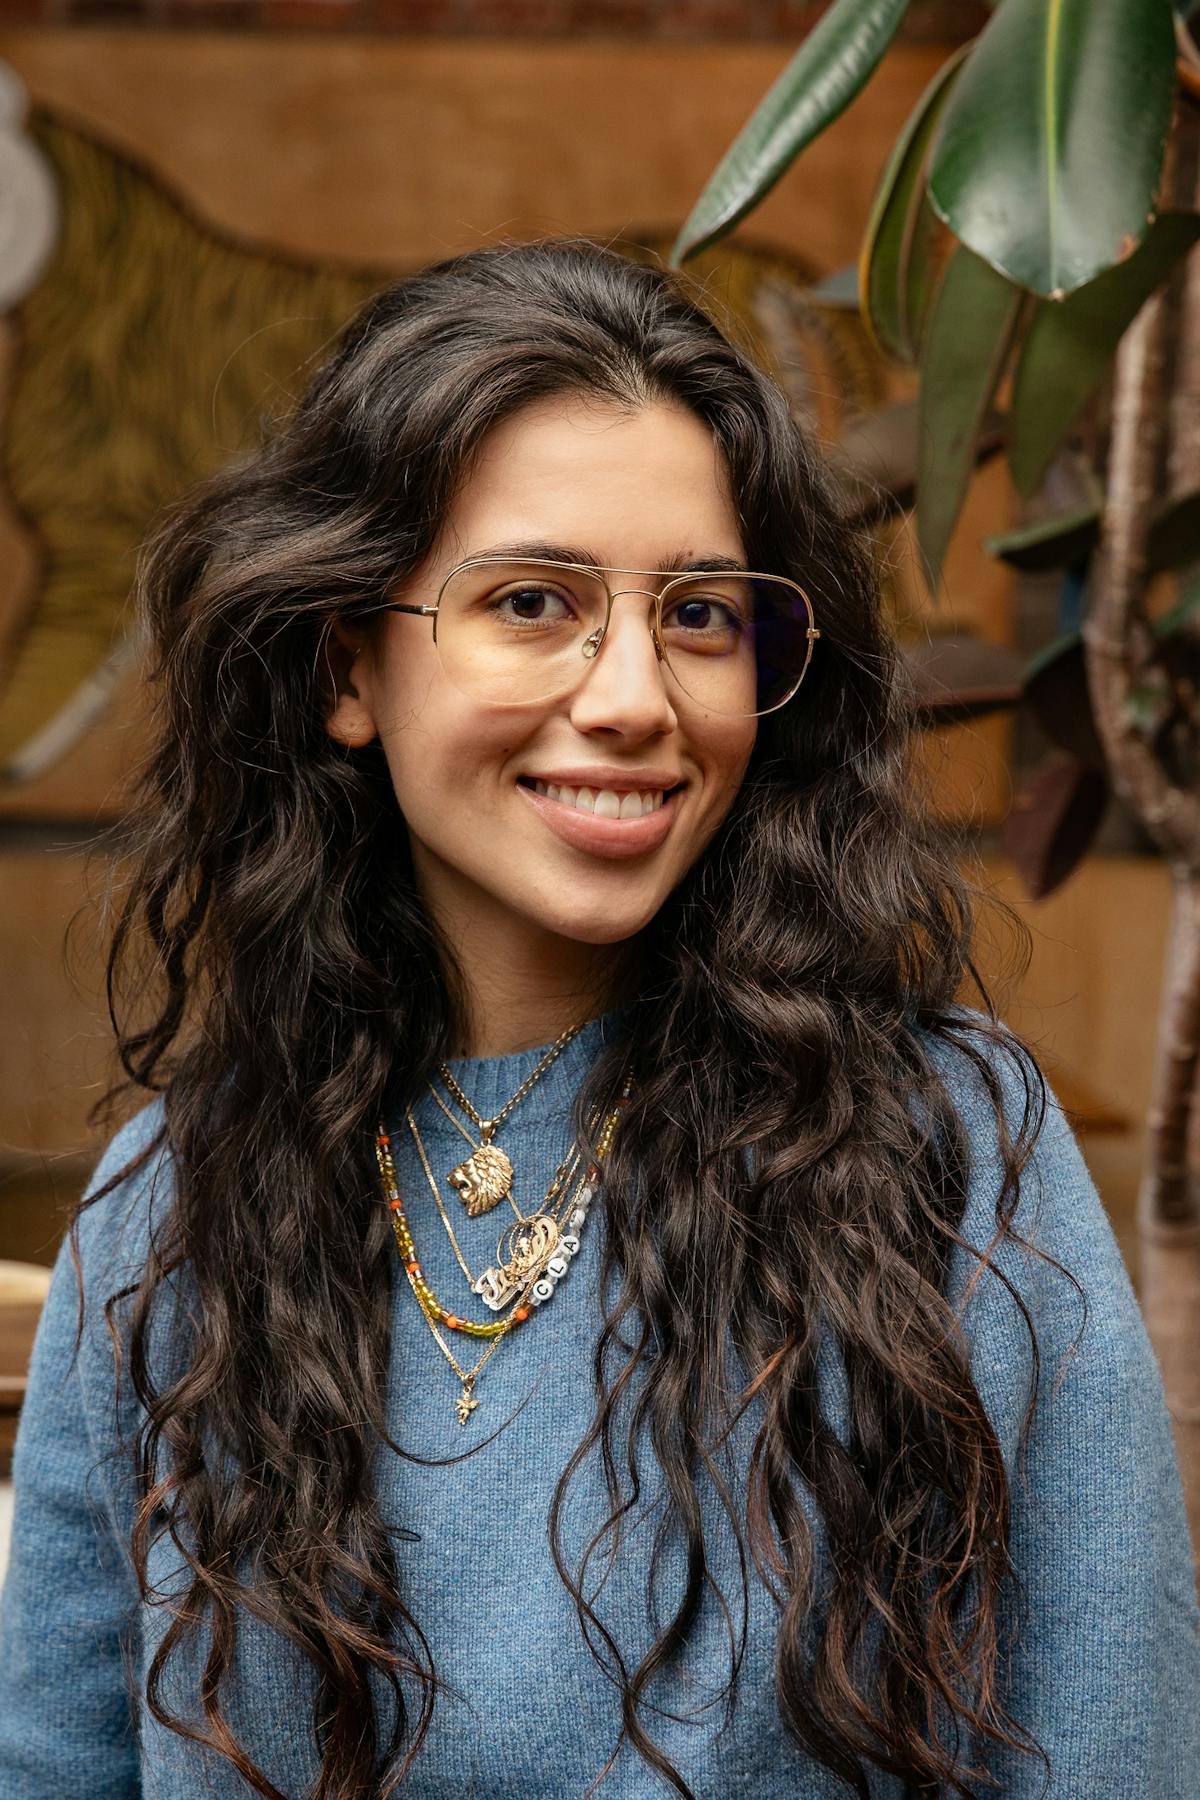 a woman with long curly hair wearing glasses and a blue sweater smiling